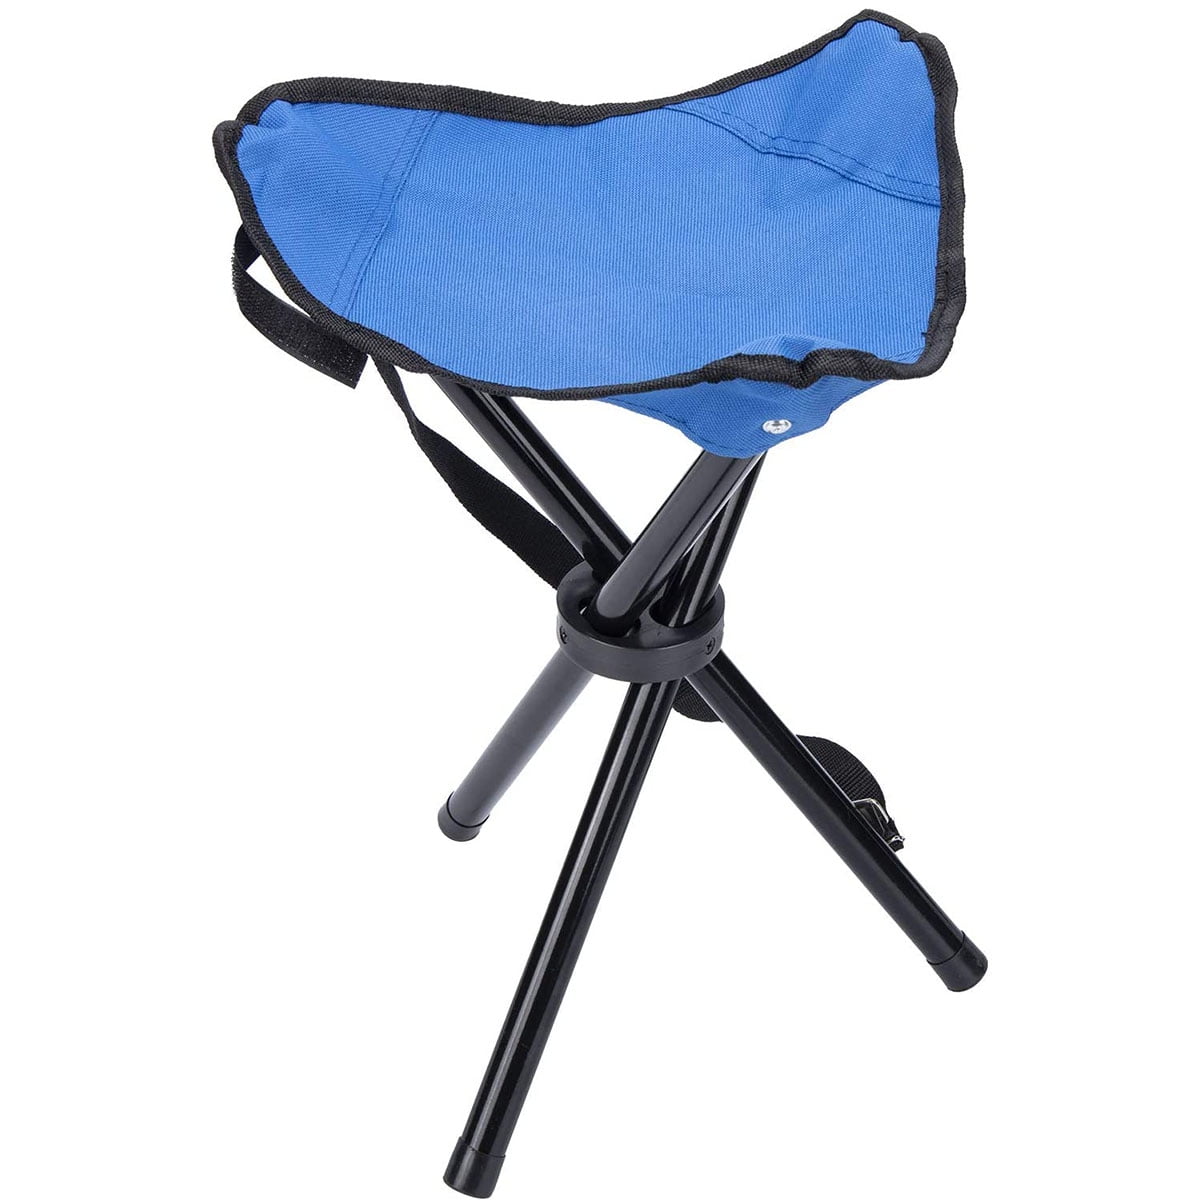 Summit Strong Camping Fishing Folding Travel Tripod Stool Chair Seat Carry Bag 